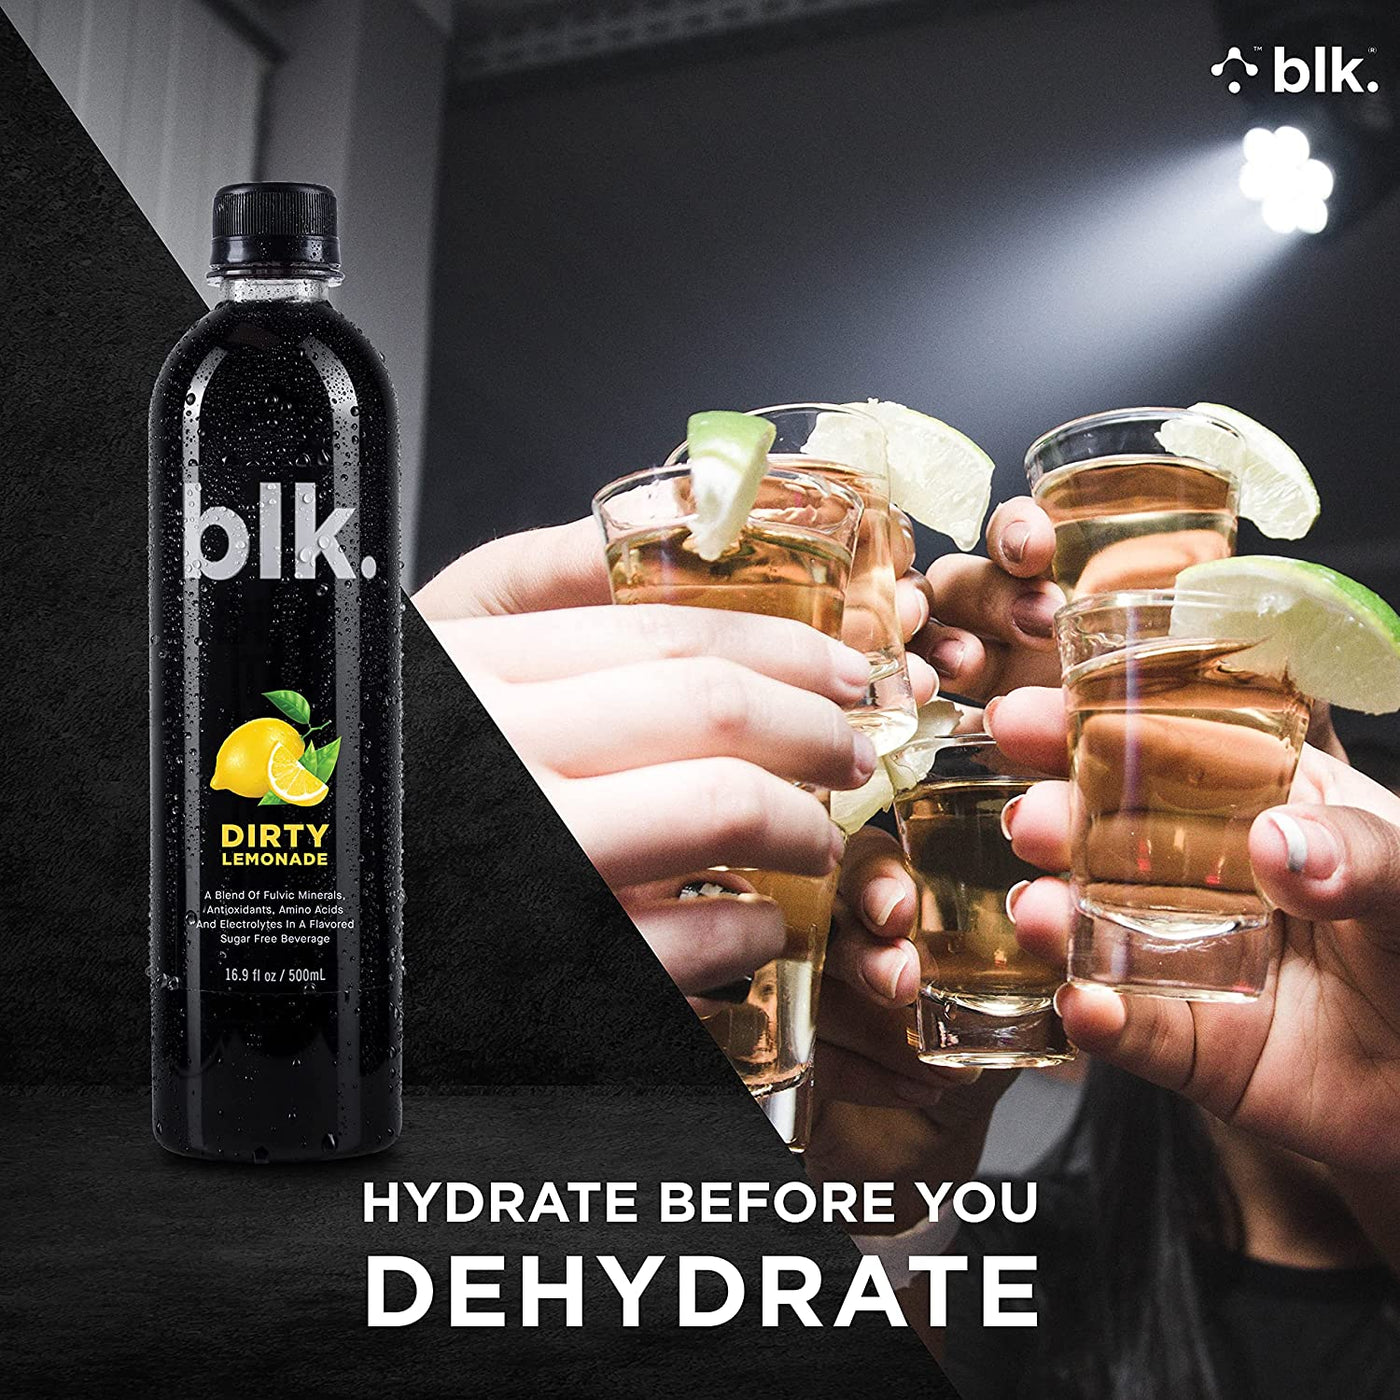 hydrate before you dehydrate - recovery and hydration beverage - hangover free - prevent hangover